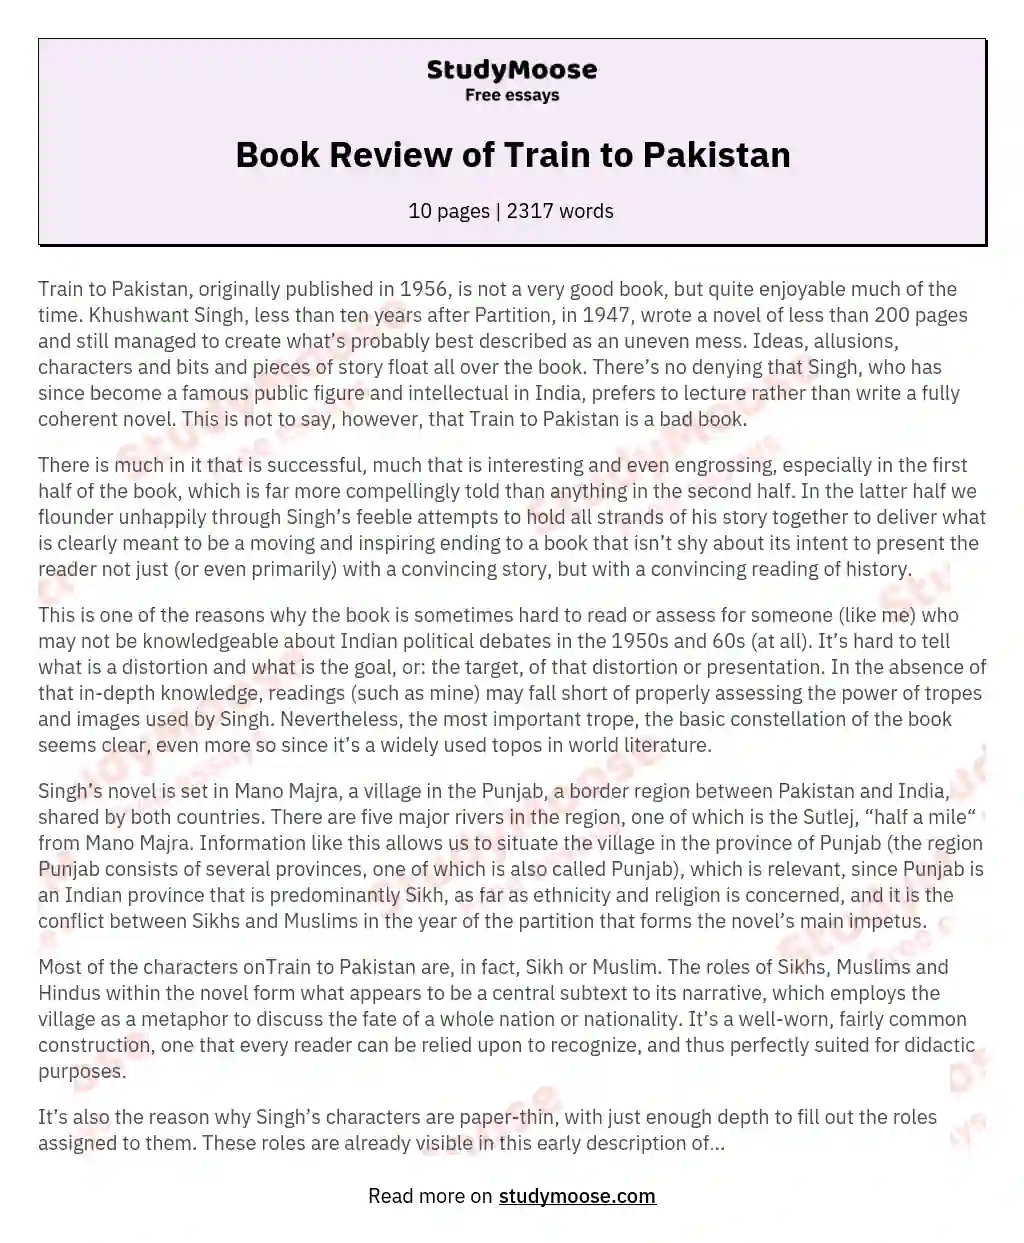 Book Review of Train to Pakistan